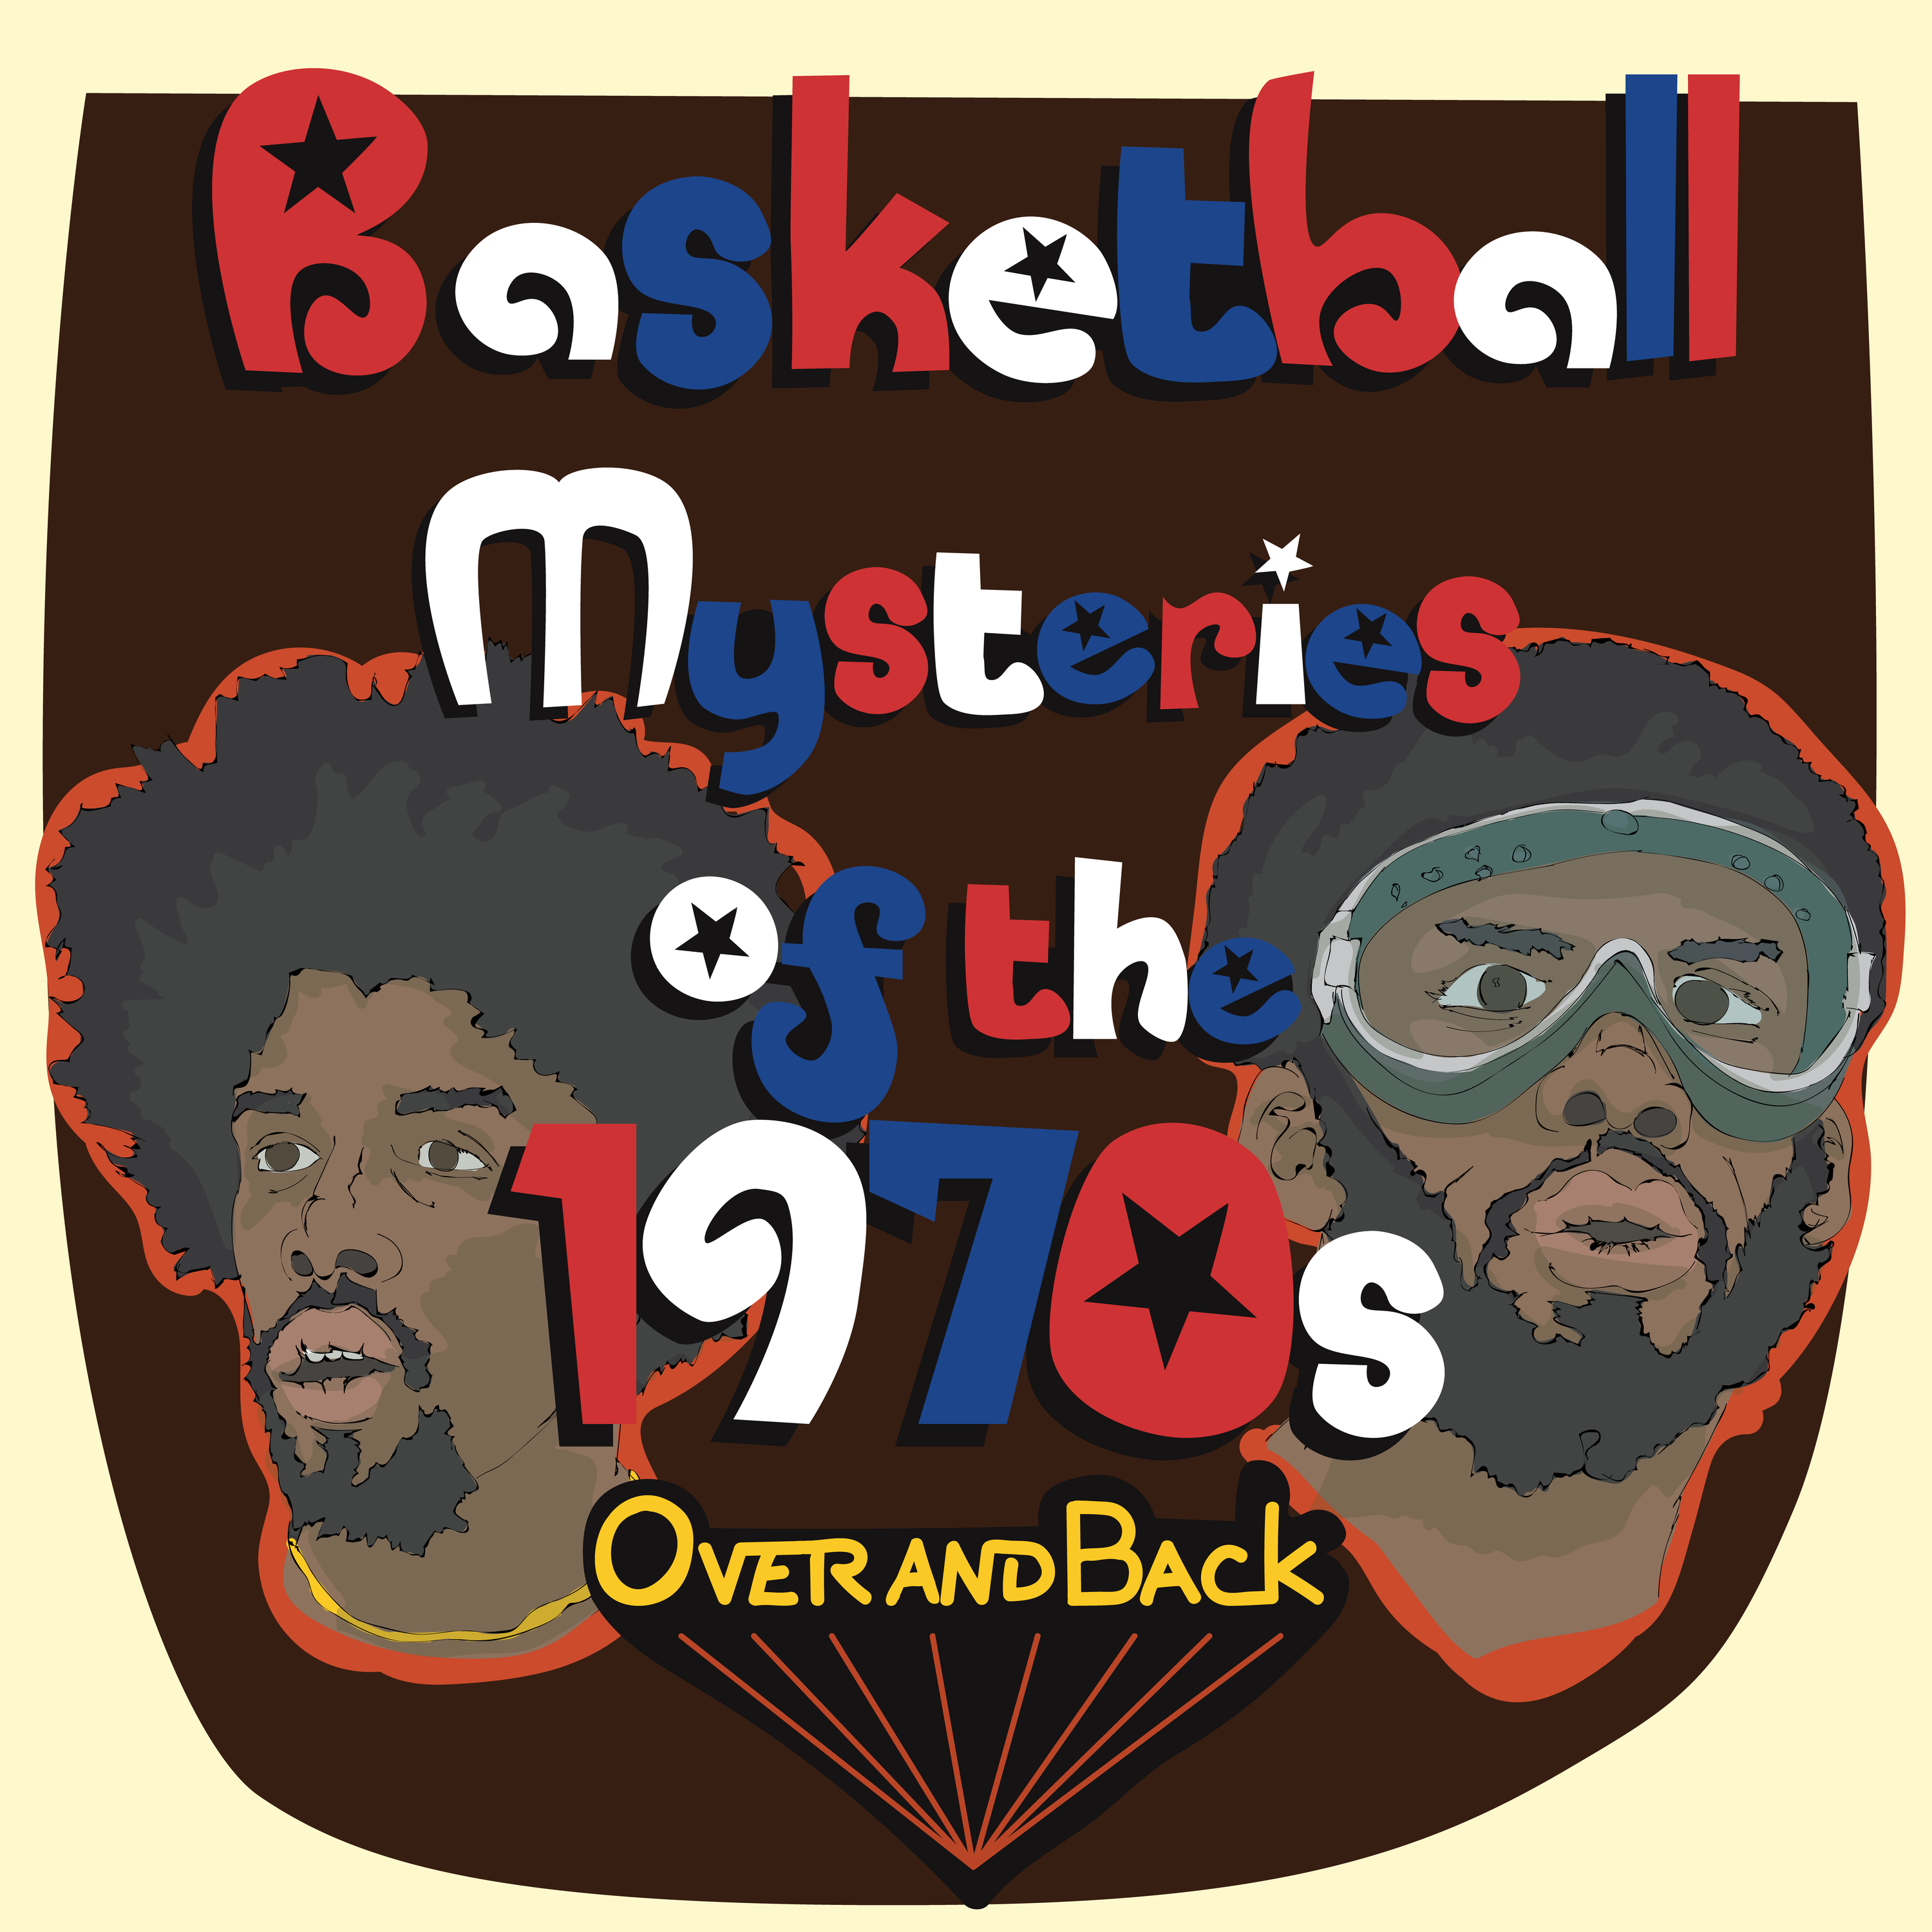 How big was the Warriors' 1975 Finals upset? (Basketball Mysteries of the 1970s #16)